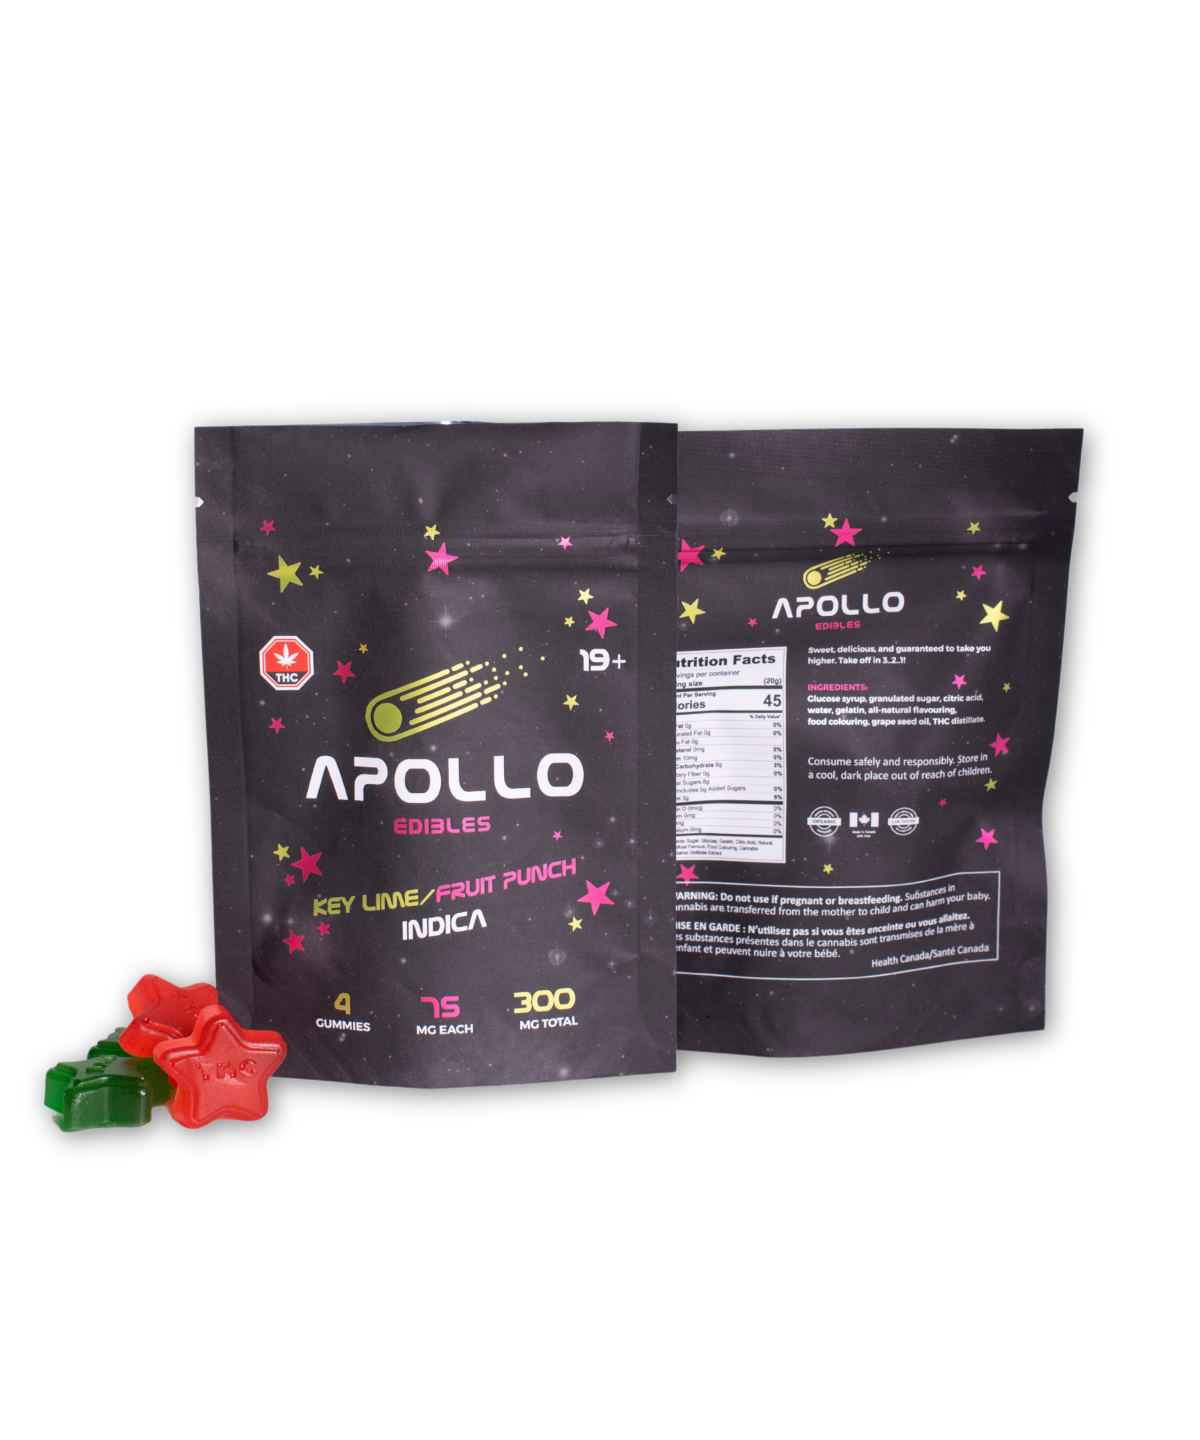 Buy Apollo Edibles - Key Lime/Fruit Punch Shooting Stars 300MG THC (INDICA) at MMJ Express Online Shop